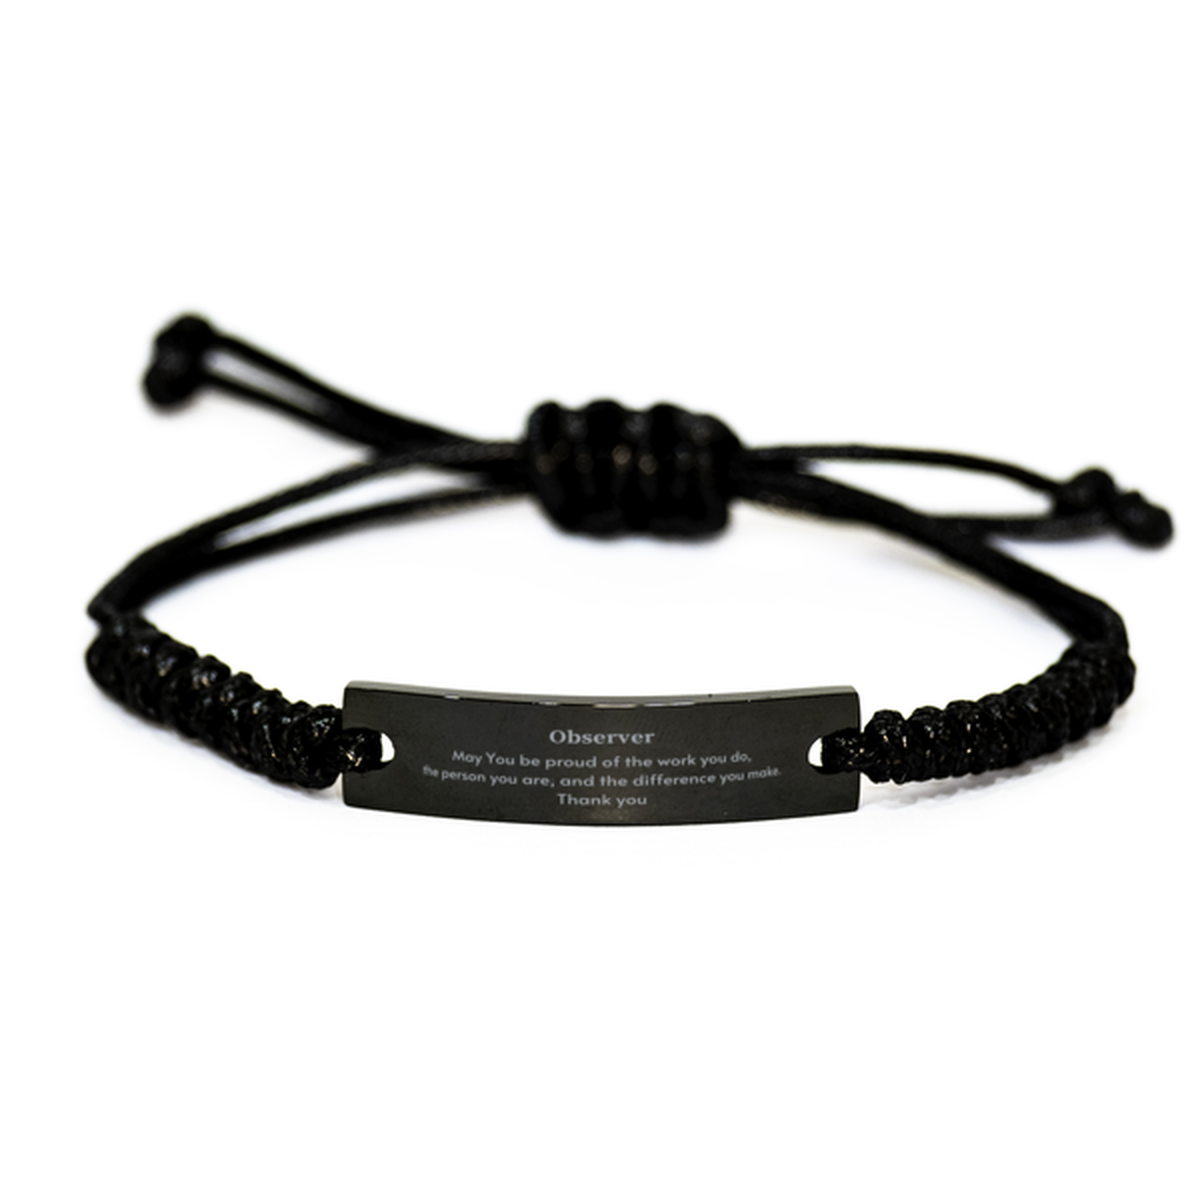 Heartwarming Black Rope Bracelet Retirement Coworkers Gifts for Observer, Observer May You be proud of the work you do, the person you are Gifts for Boss Men Women Friends